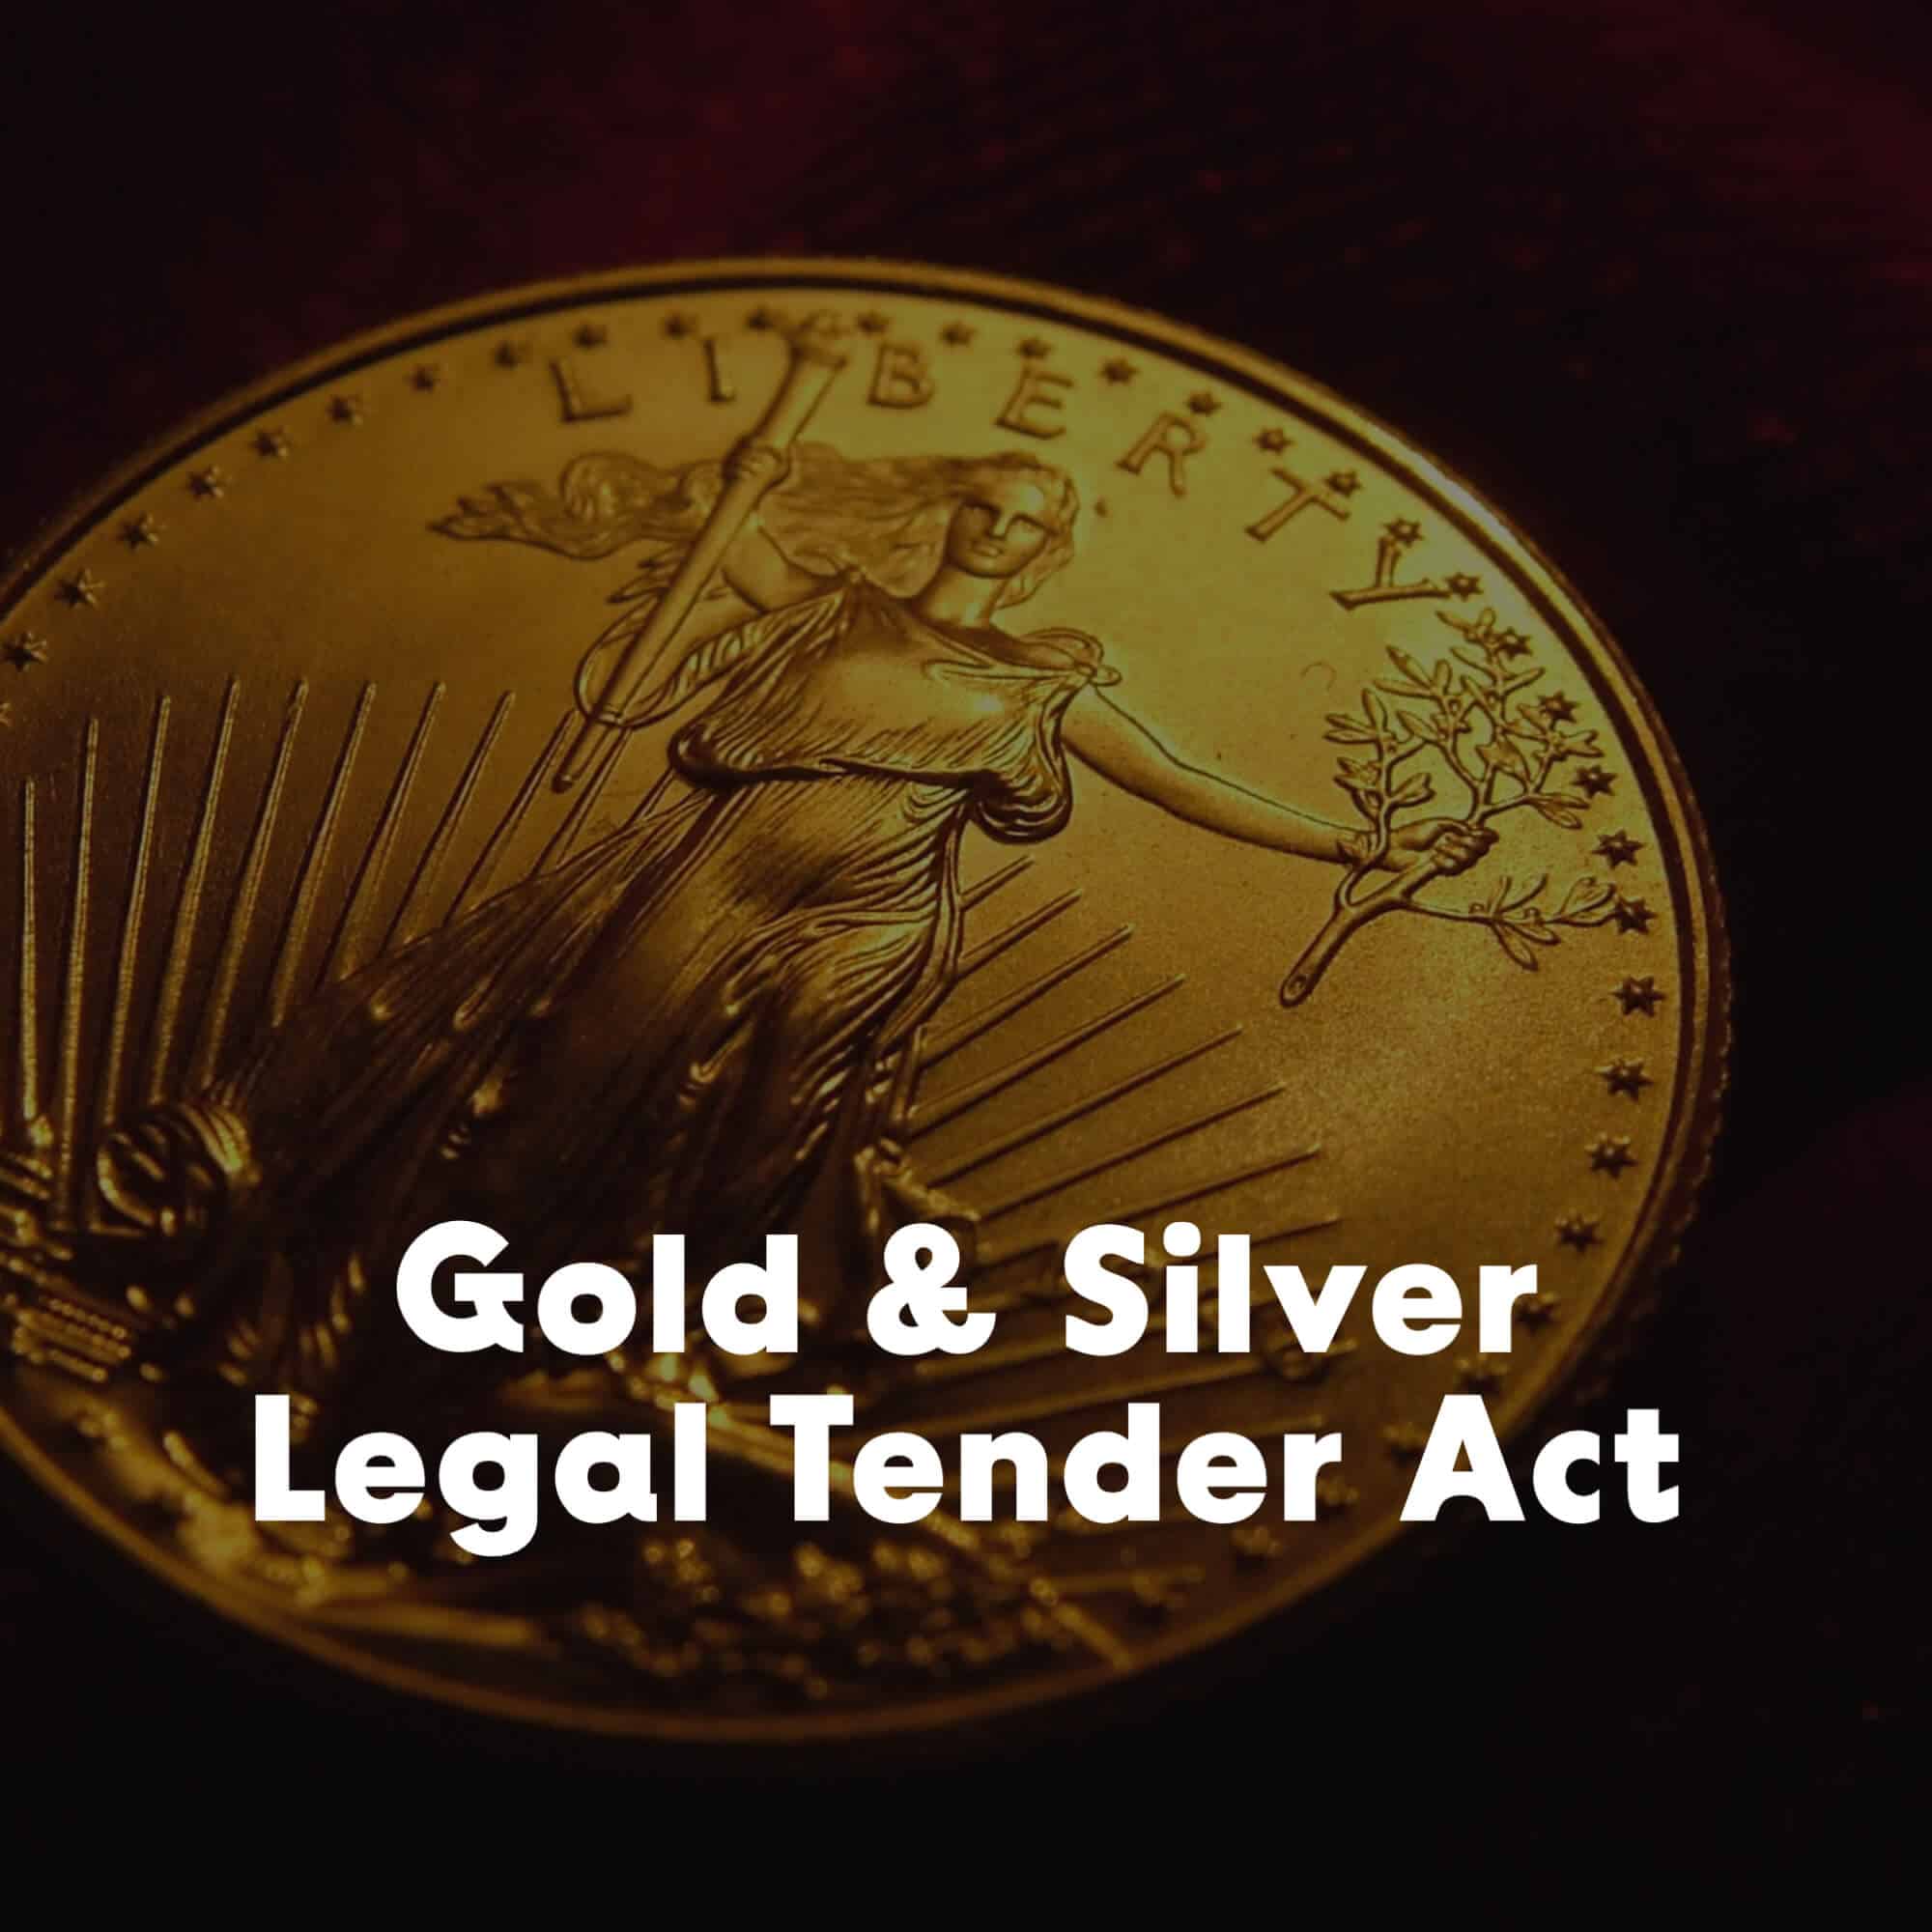 Legal Tender Act: Gold and Silver are Money